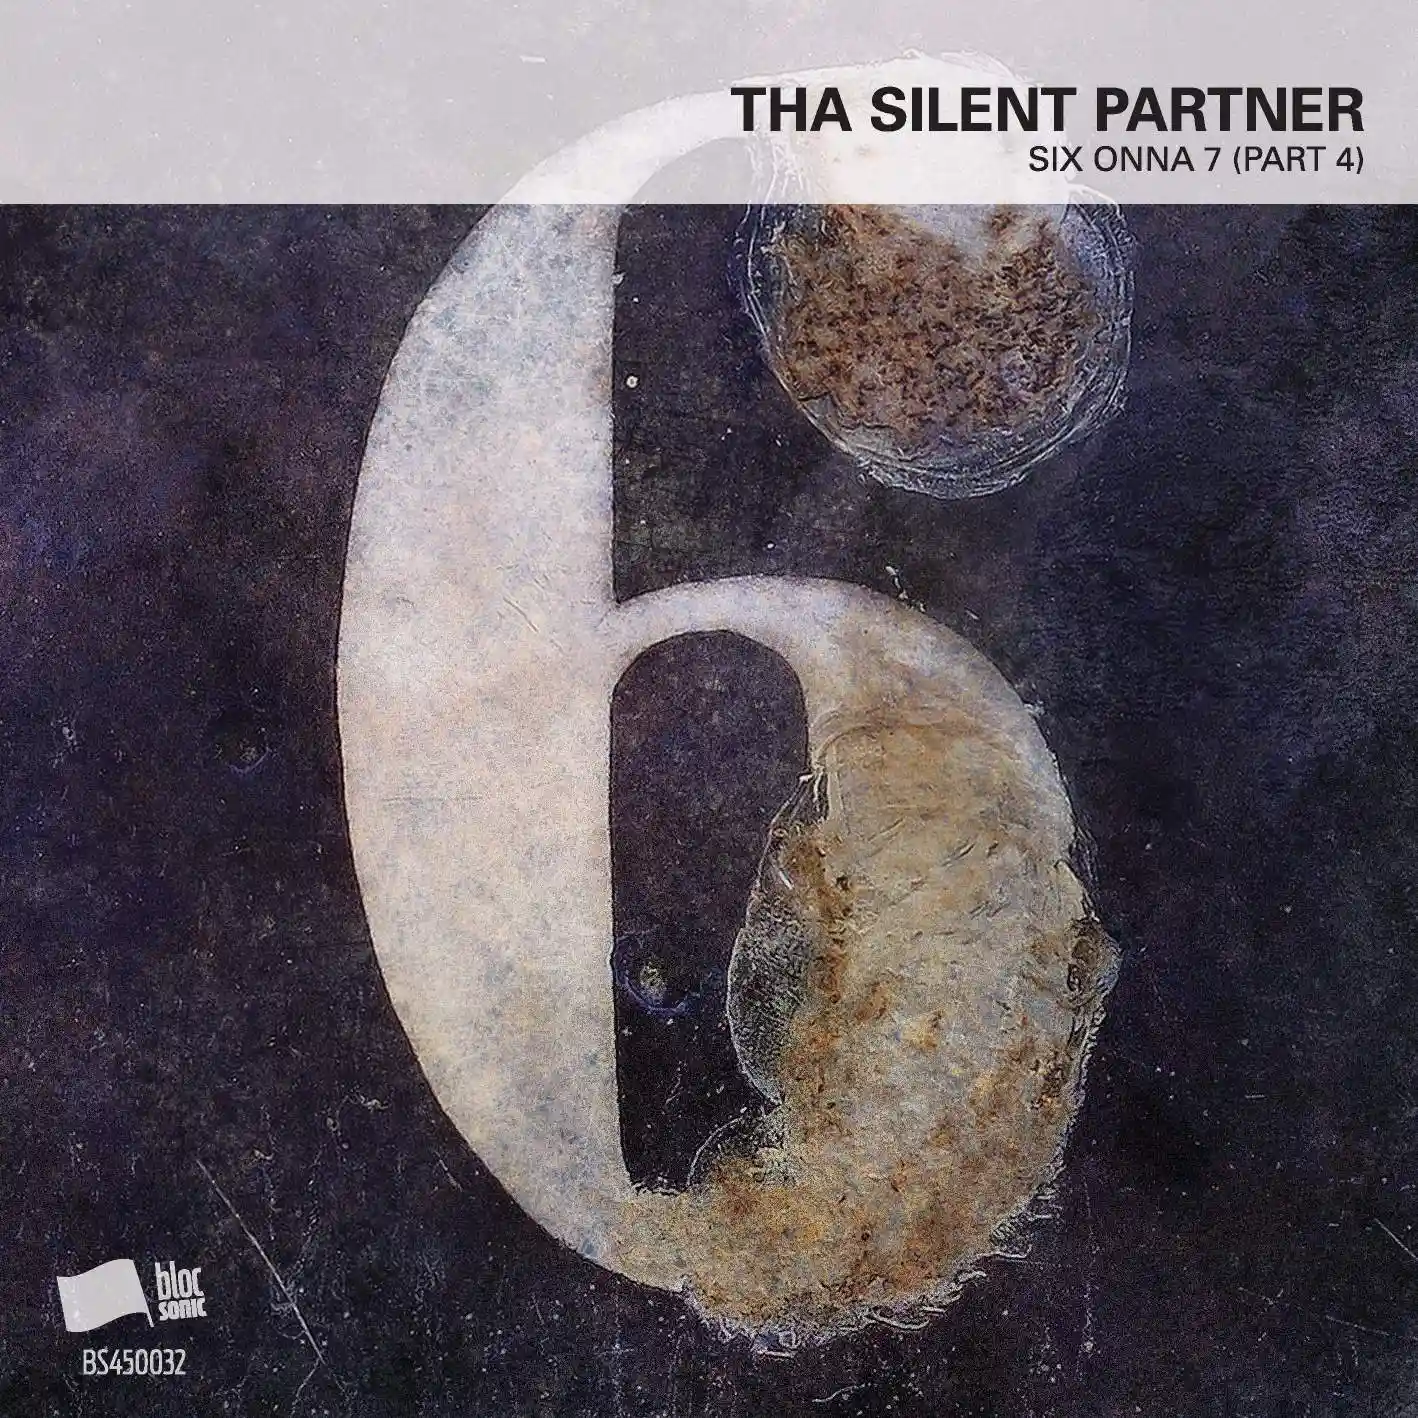 Album cover for “SIX ONNA 7 (Part 4)” by Tha Silent Partner